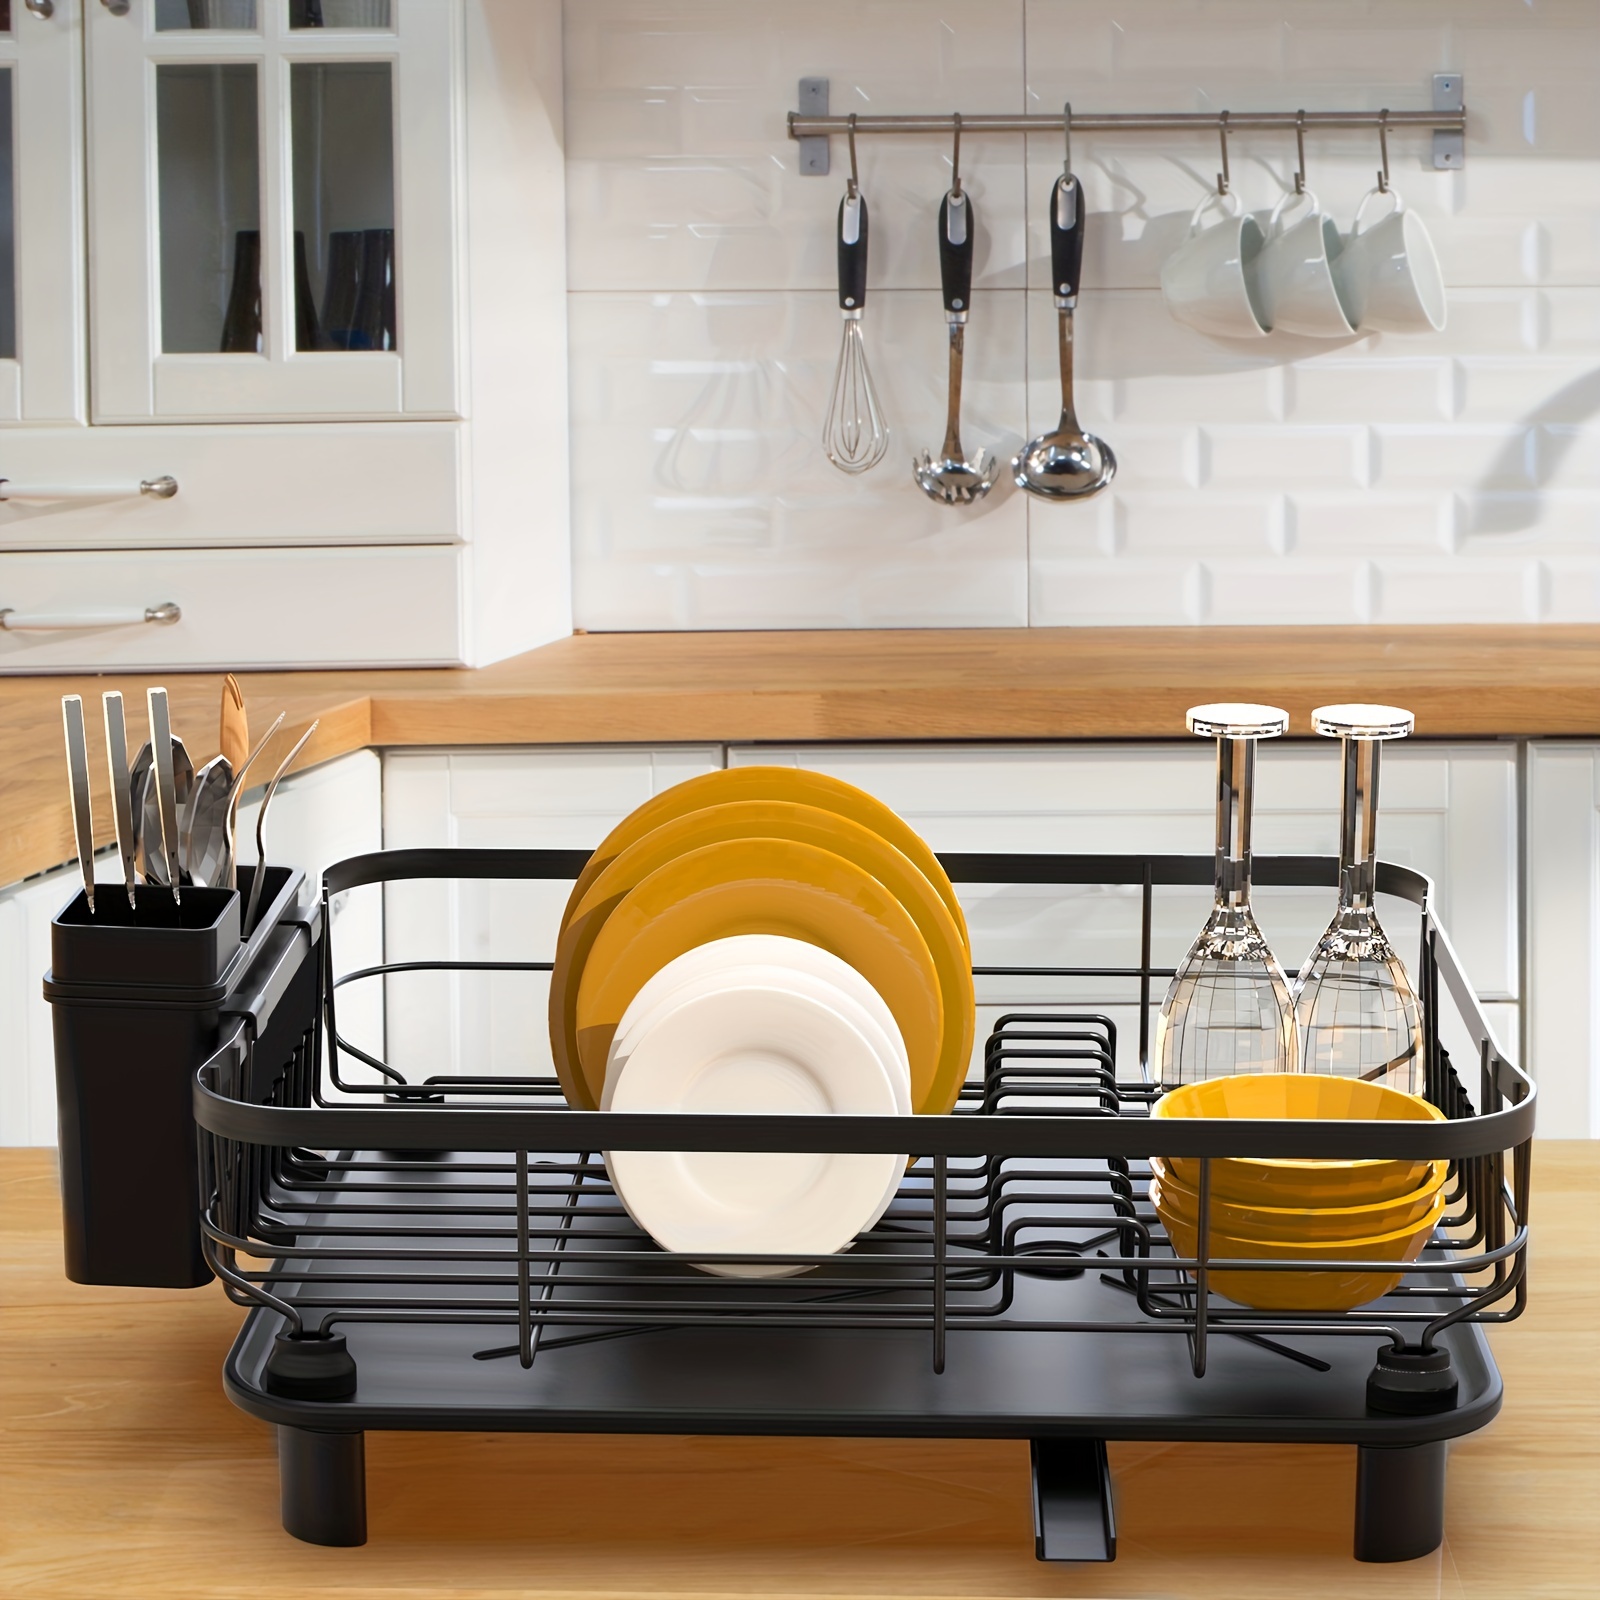 Dish Rack with Swivel Spout, Dish Drying Rack with Drainboard